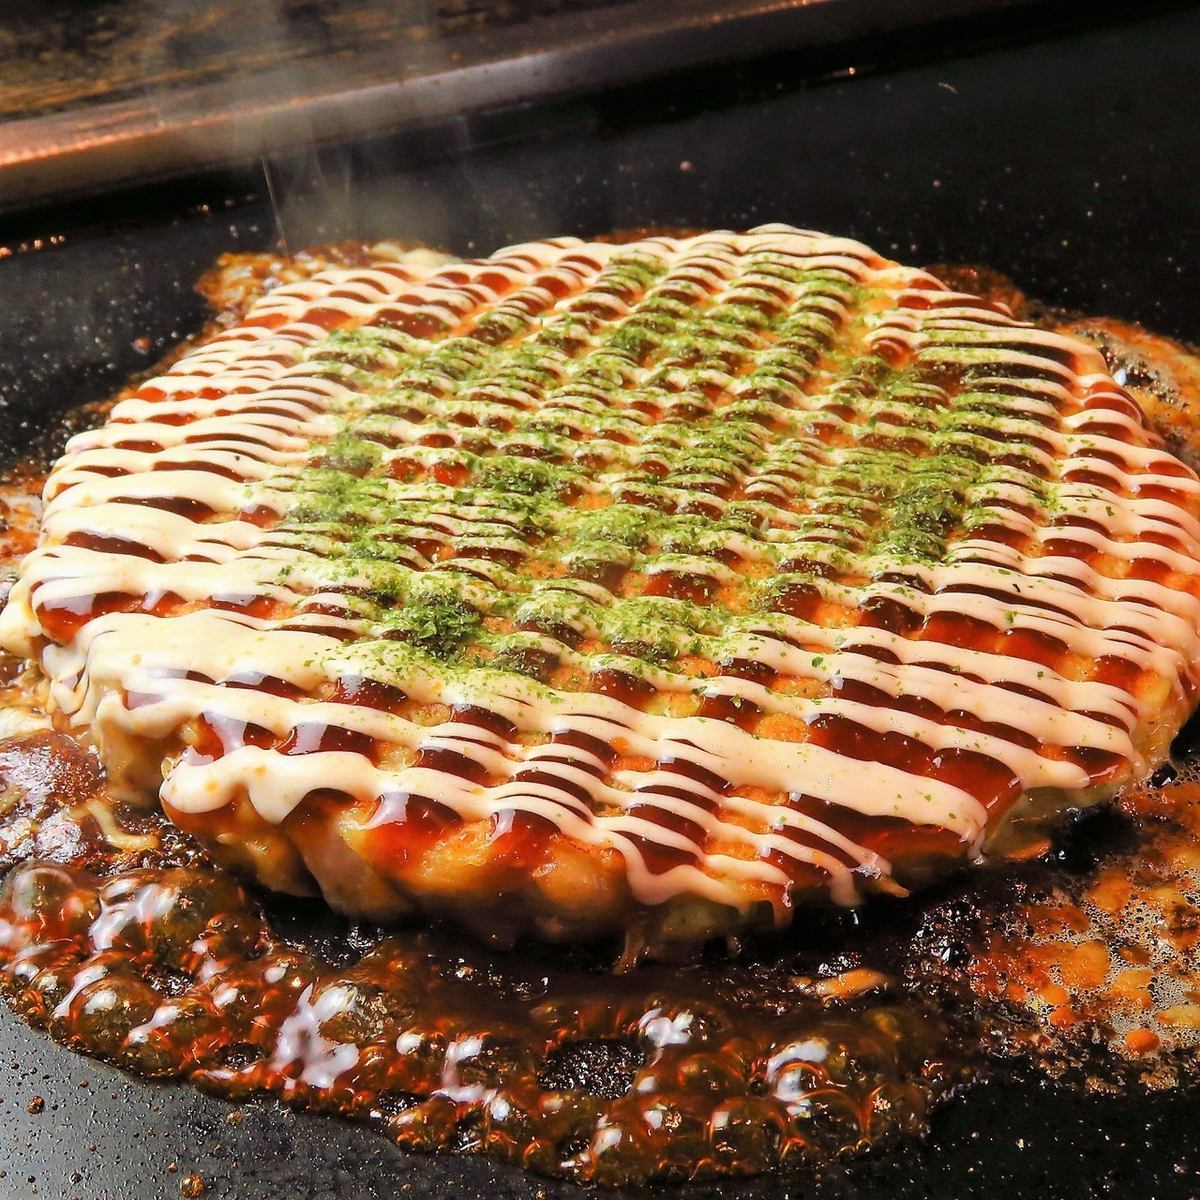 It is a restaurant where you can enjoy authentic and diverse flavors of monja in a calm atmosphere.